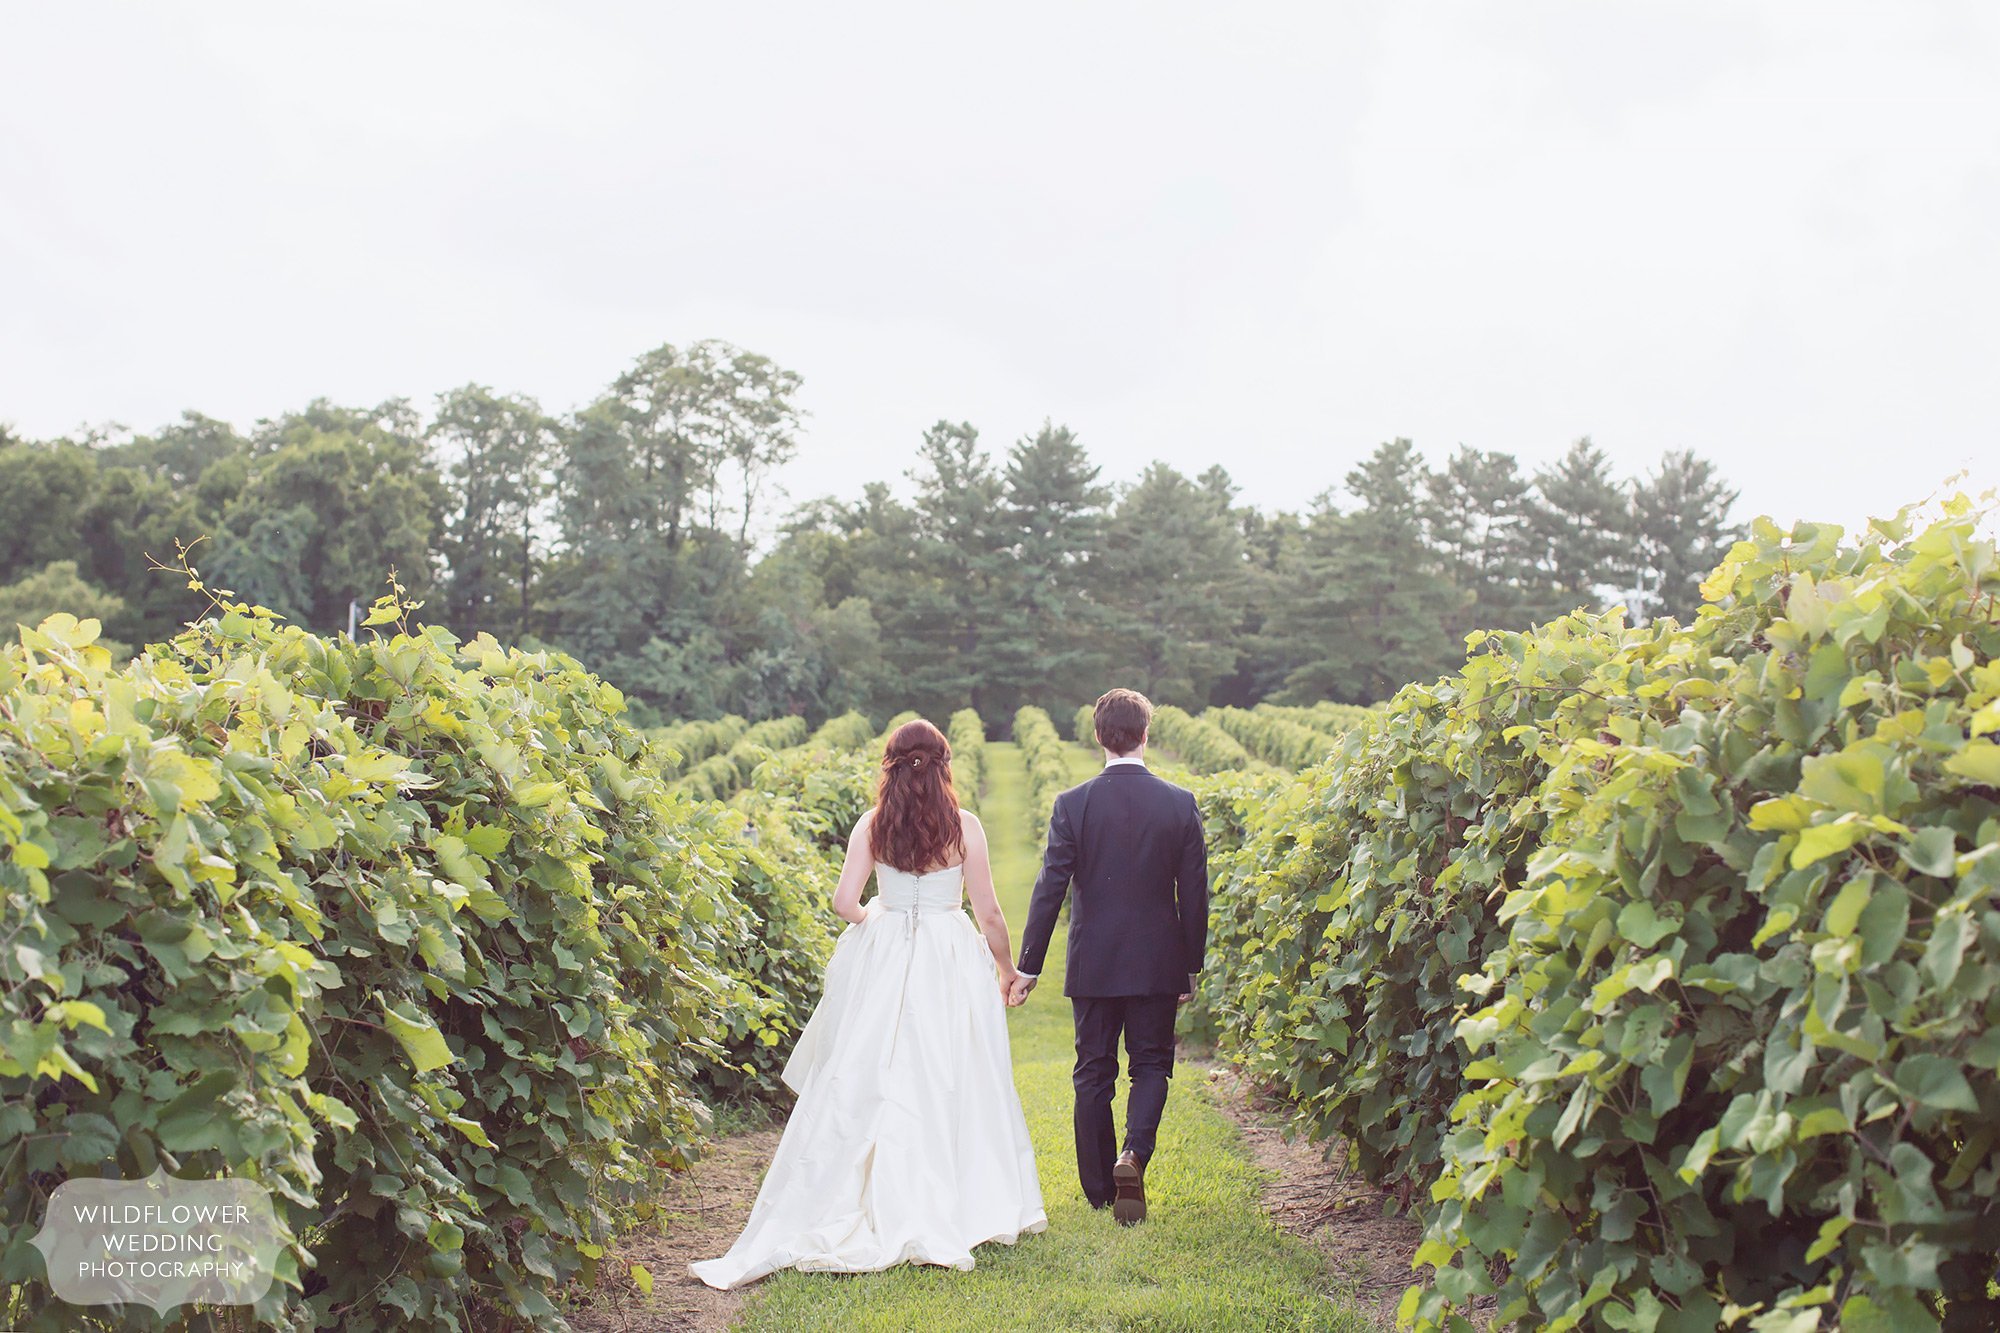 Fine art wedding photography at the Les Bourgeois Vineyard venue in Rocheport, MO.